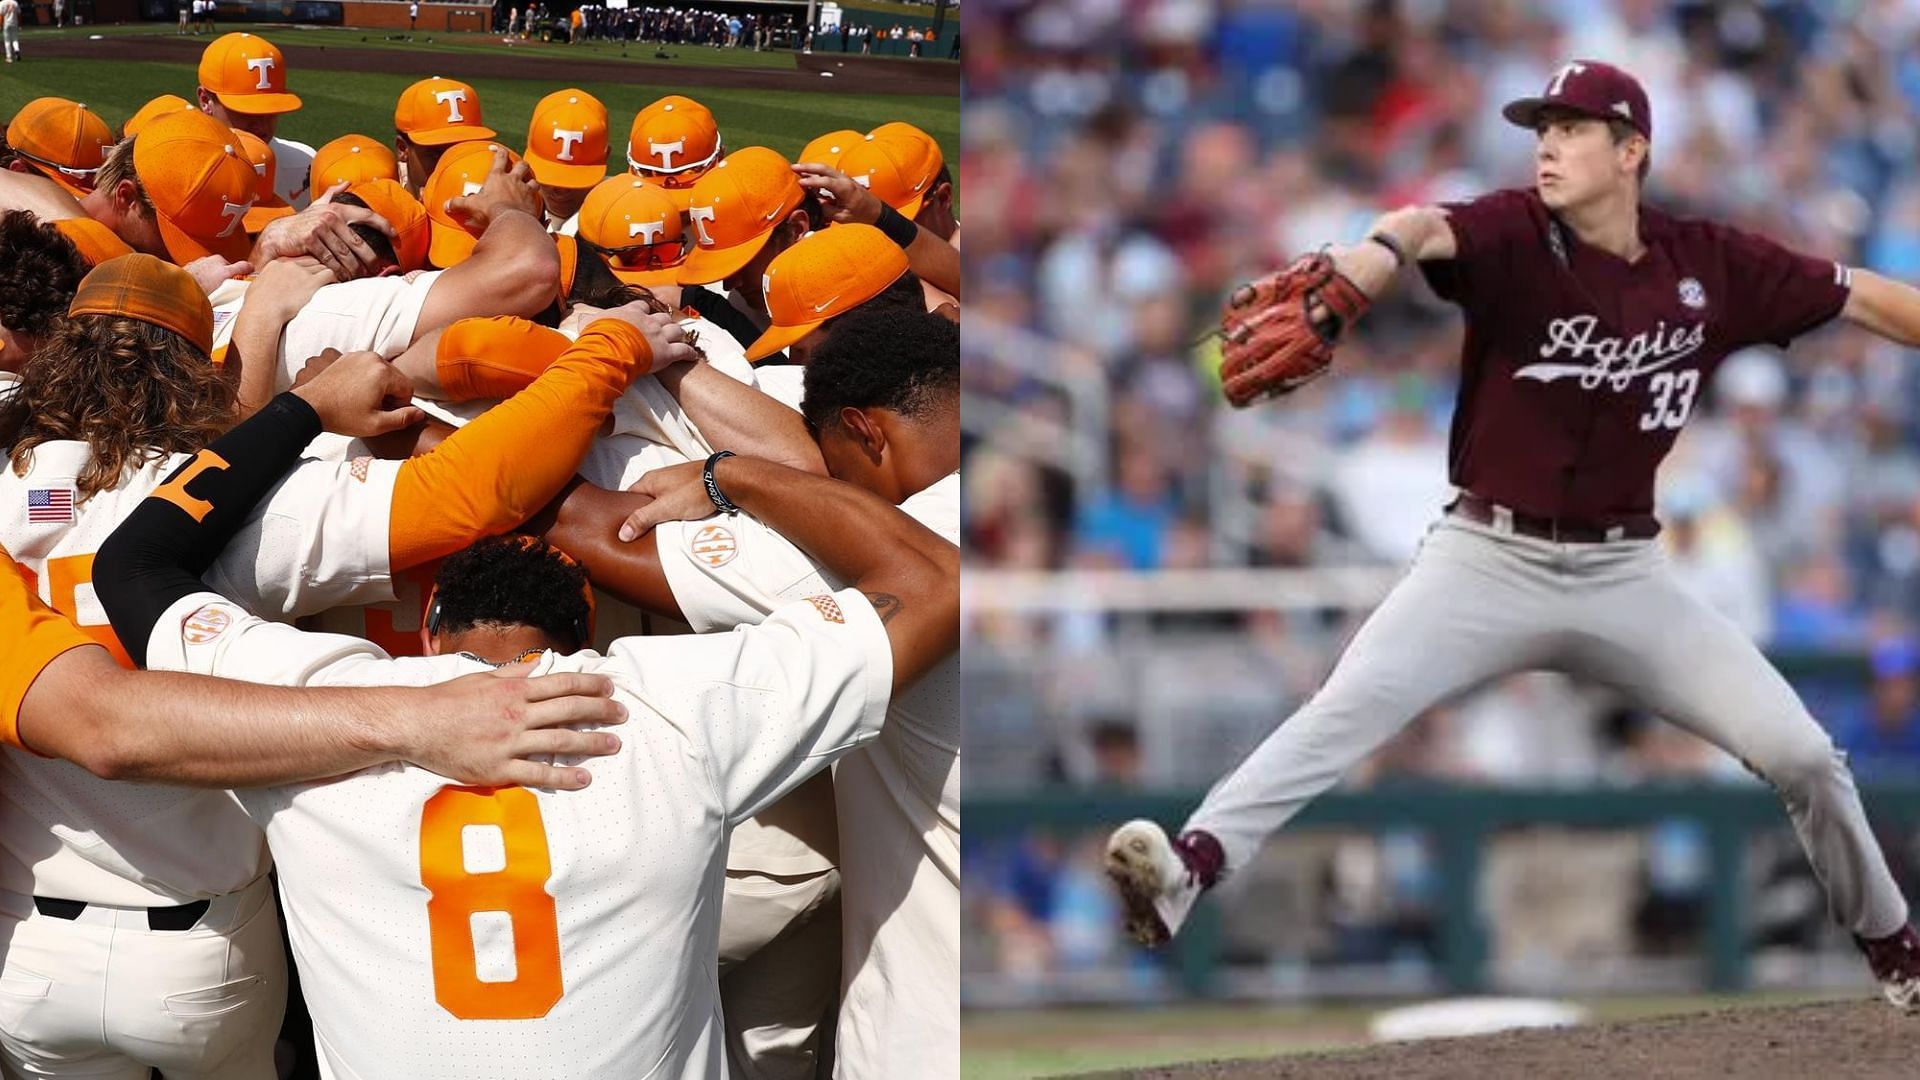 Images courtesy of Tennessee Athletics and SEC